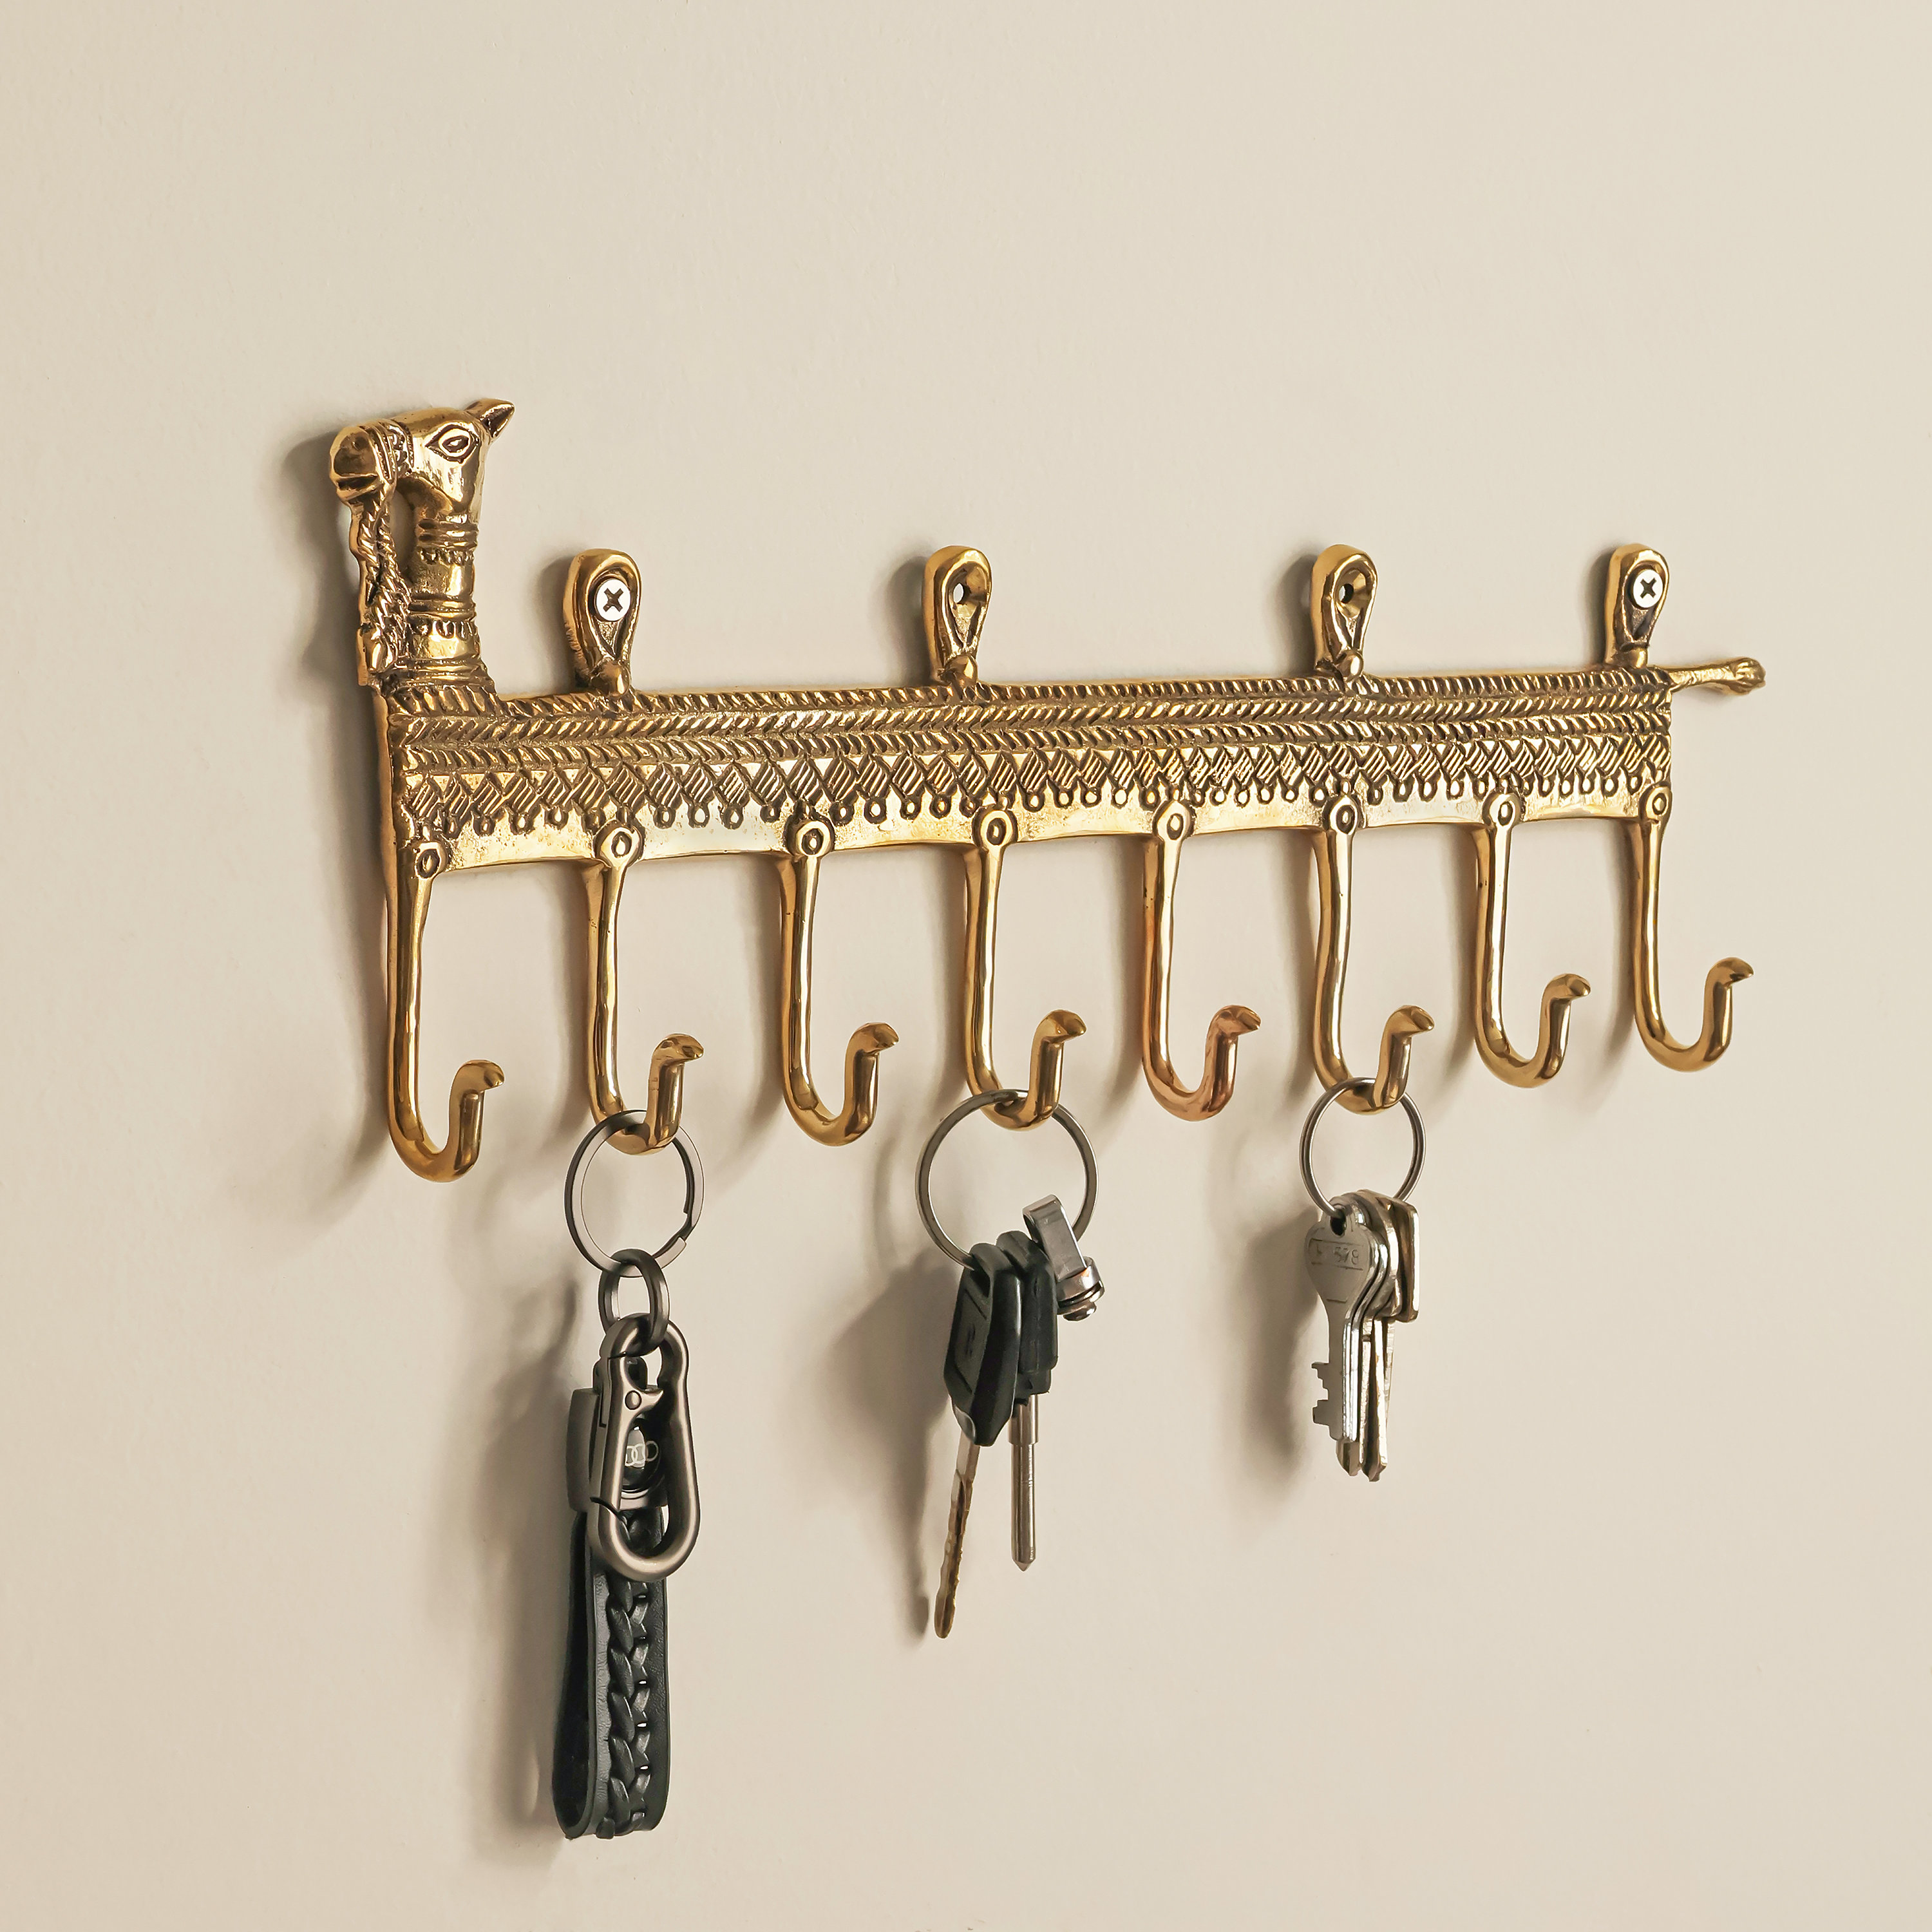 Indian-Shelf 6 Piece Cat Kids Animals Vintage Wall Hooks for Hanging Coats  Gold Decorative Hooks for Bathroom Brass Key Holder for Wall Coat Rack Wall